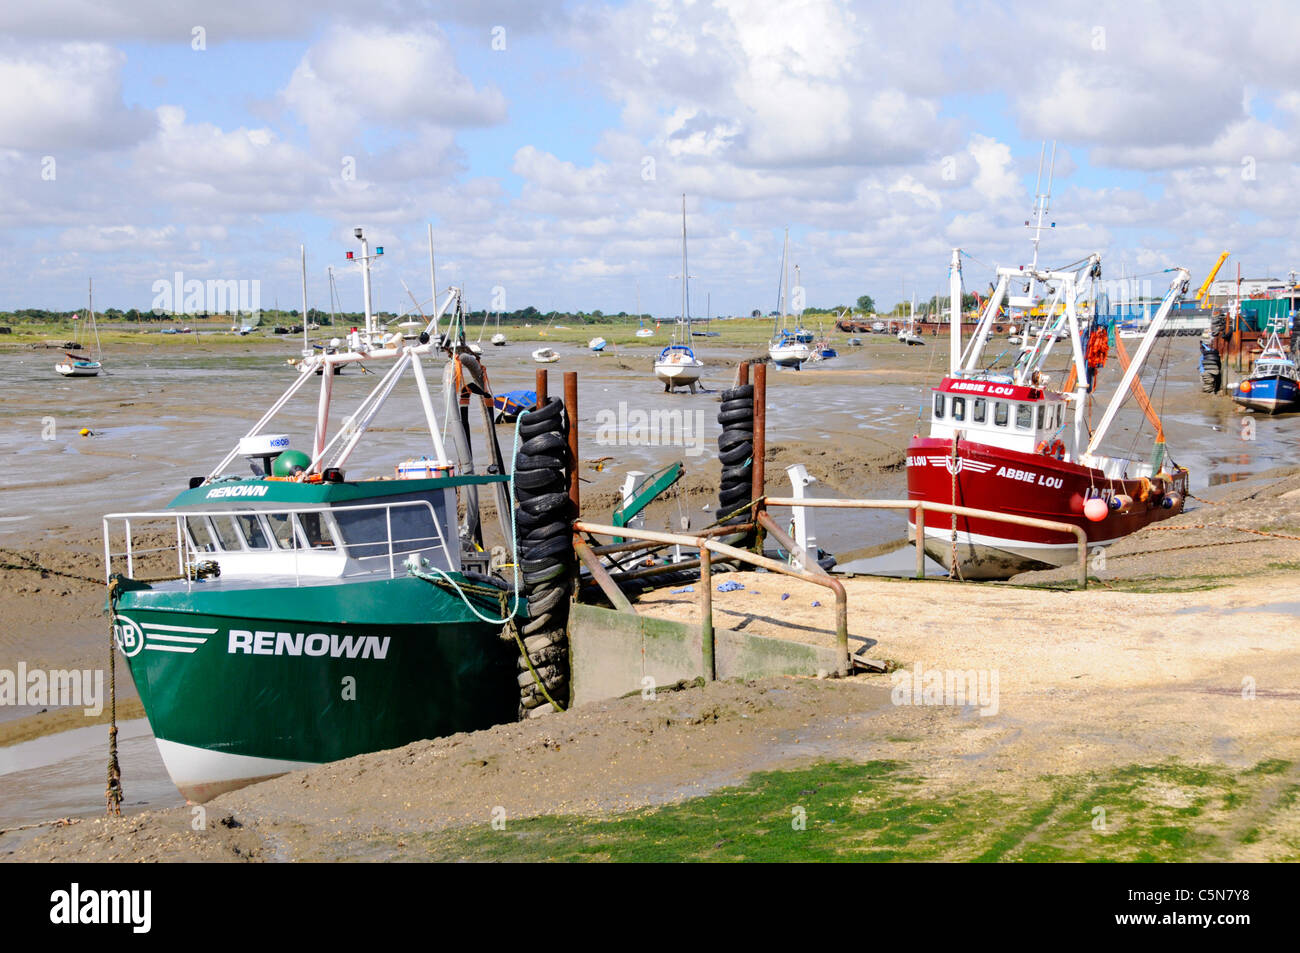 Cockle fishing boats moored Thames Estuary mud flats low tide creek beside unloading & handling facility for shellfish at Old Leigh on Essex coast UK Stock Photo